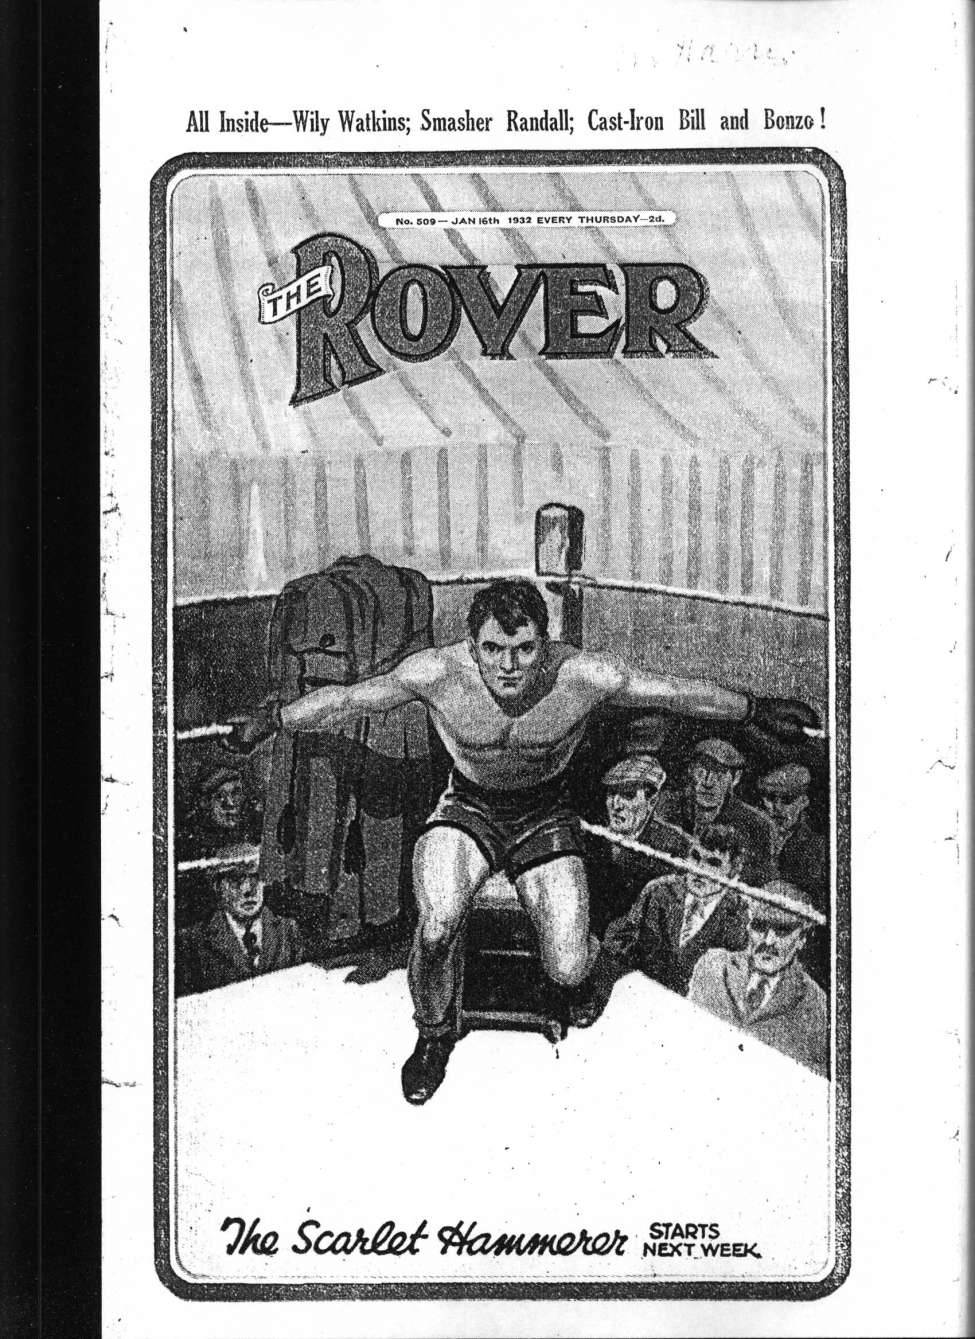 Book Cover For The Rover 509